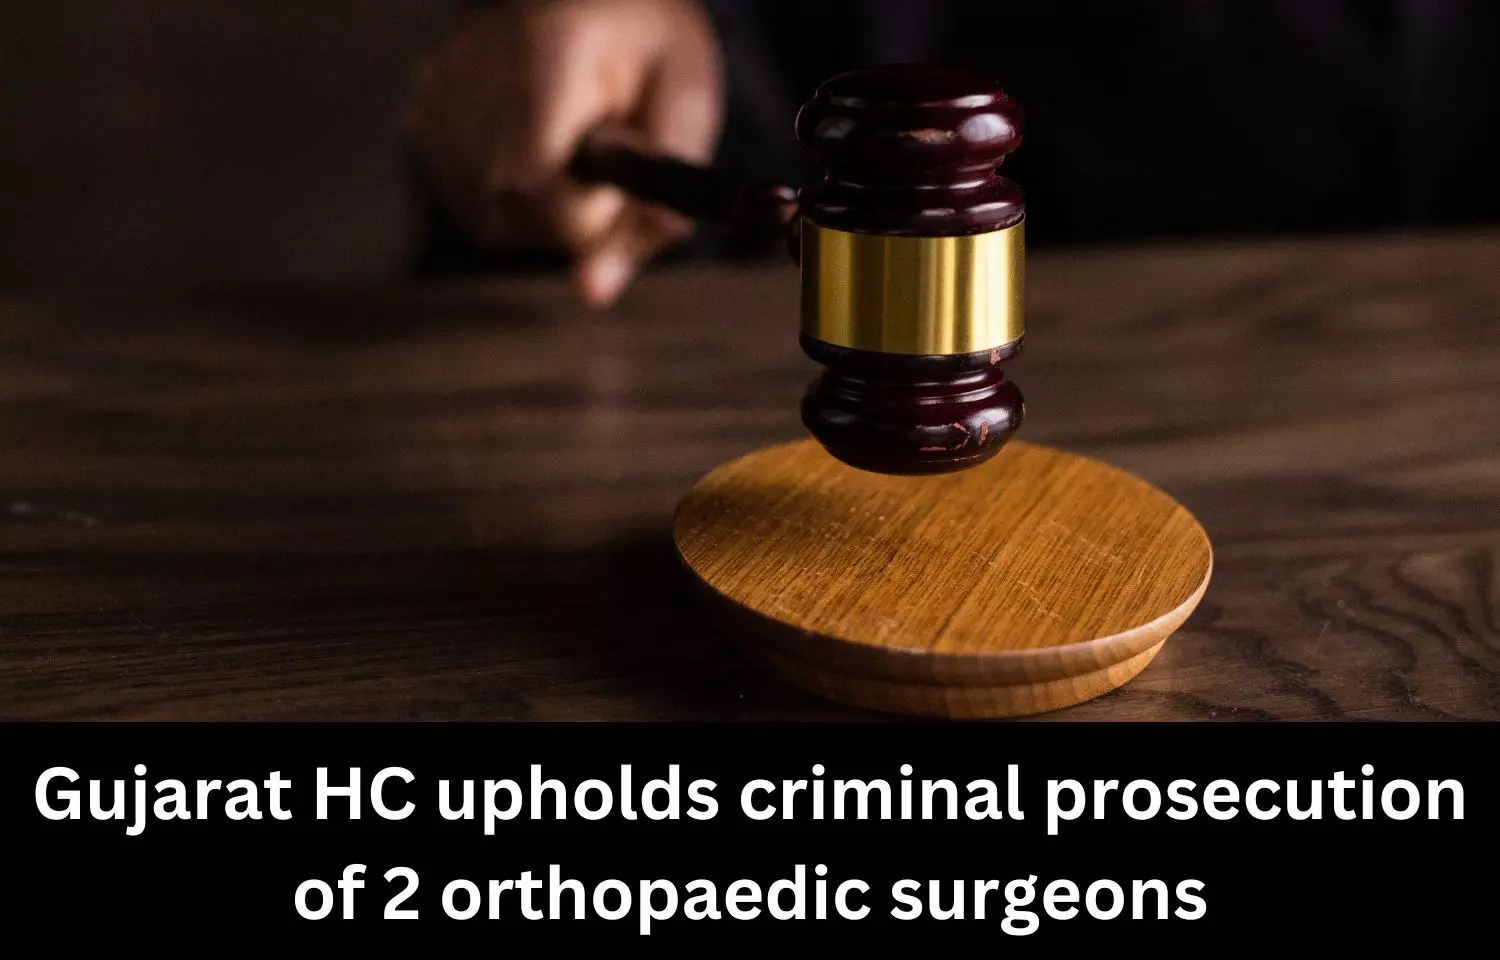 Gujarat HC upholds criminal prosecution of 2 orthopaedic surgeons, says patient consent doesnt cover negligence